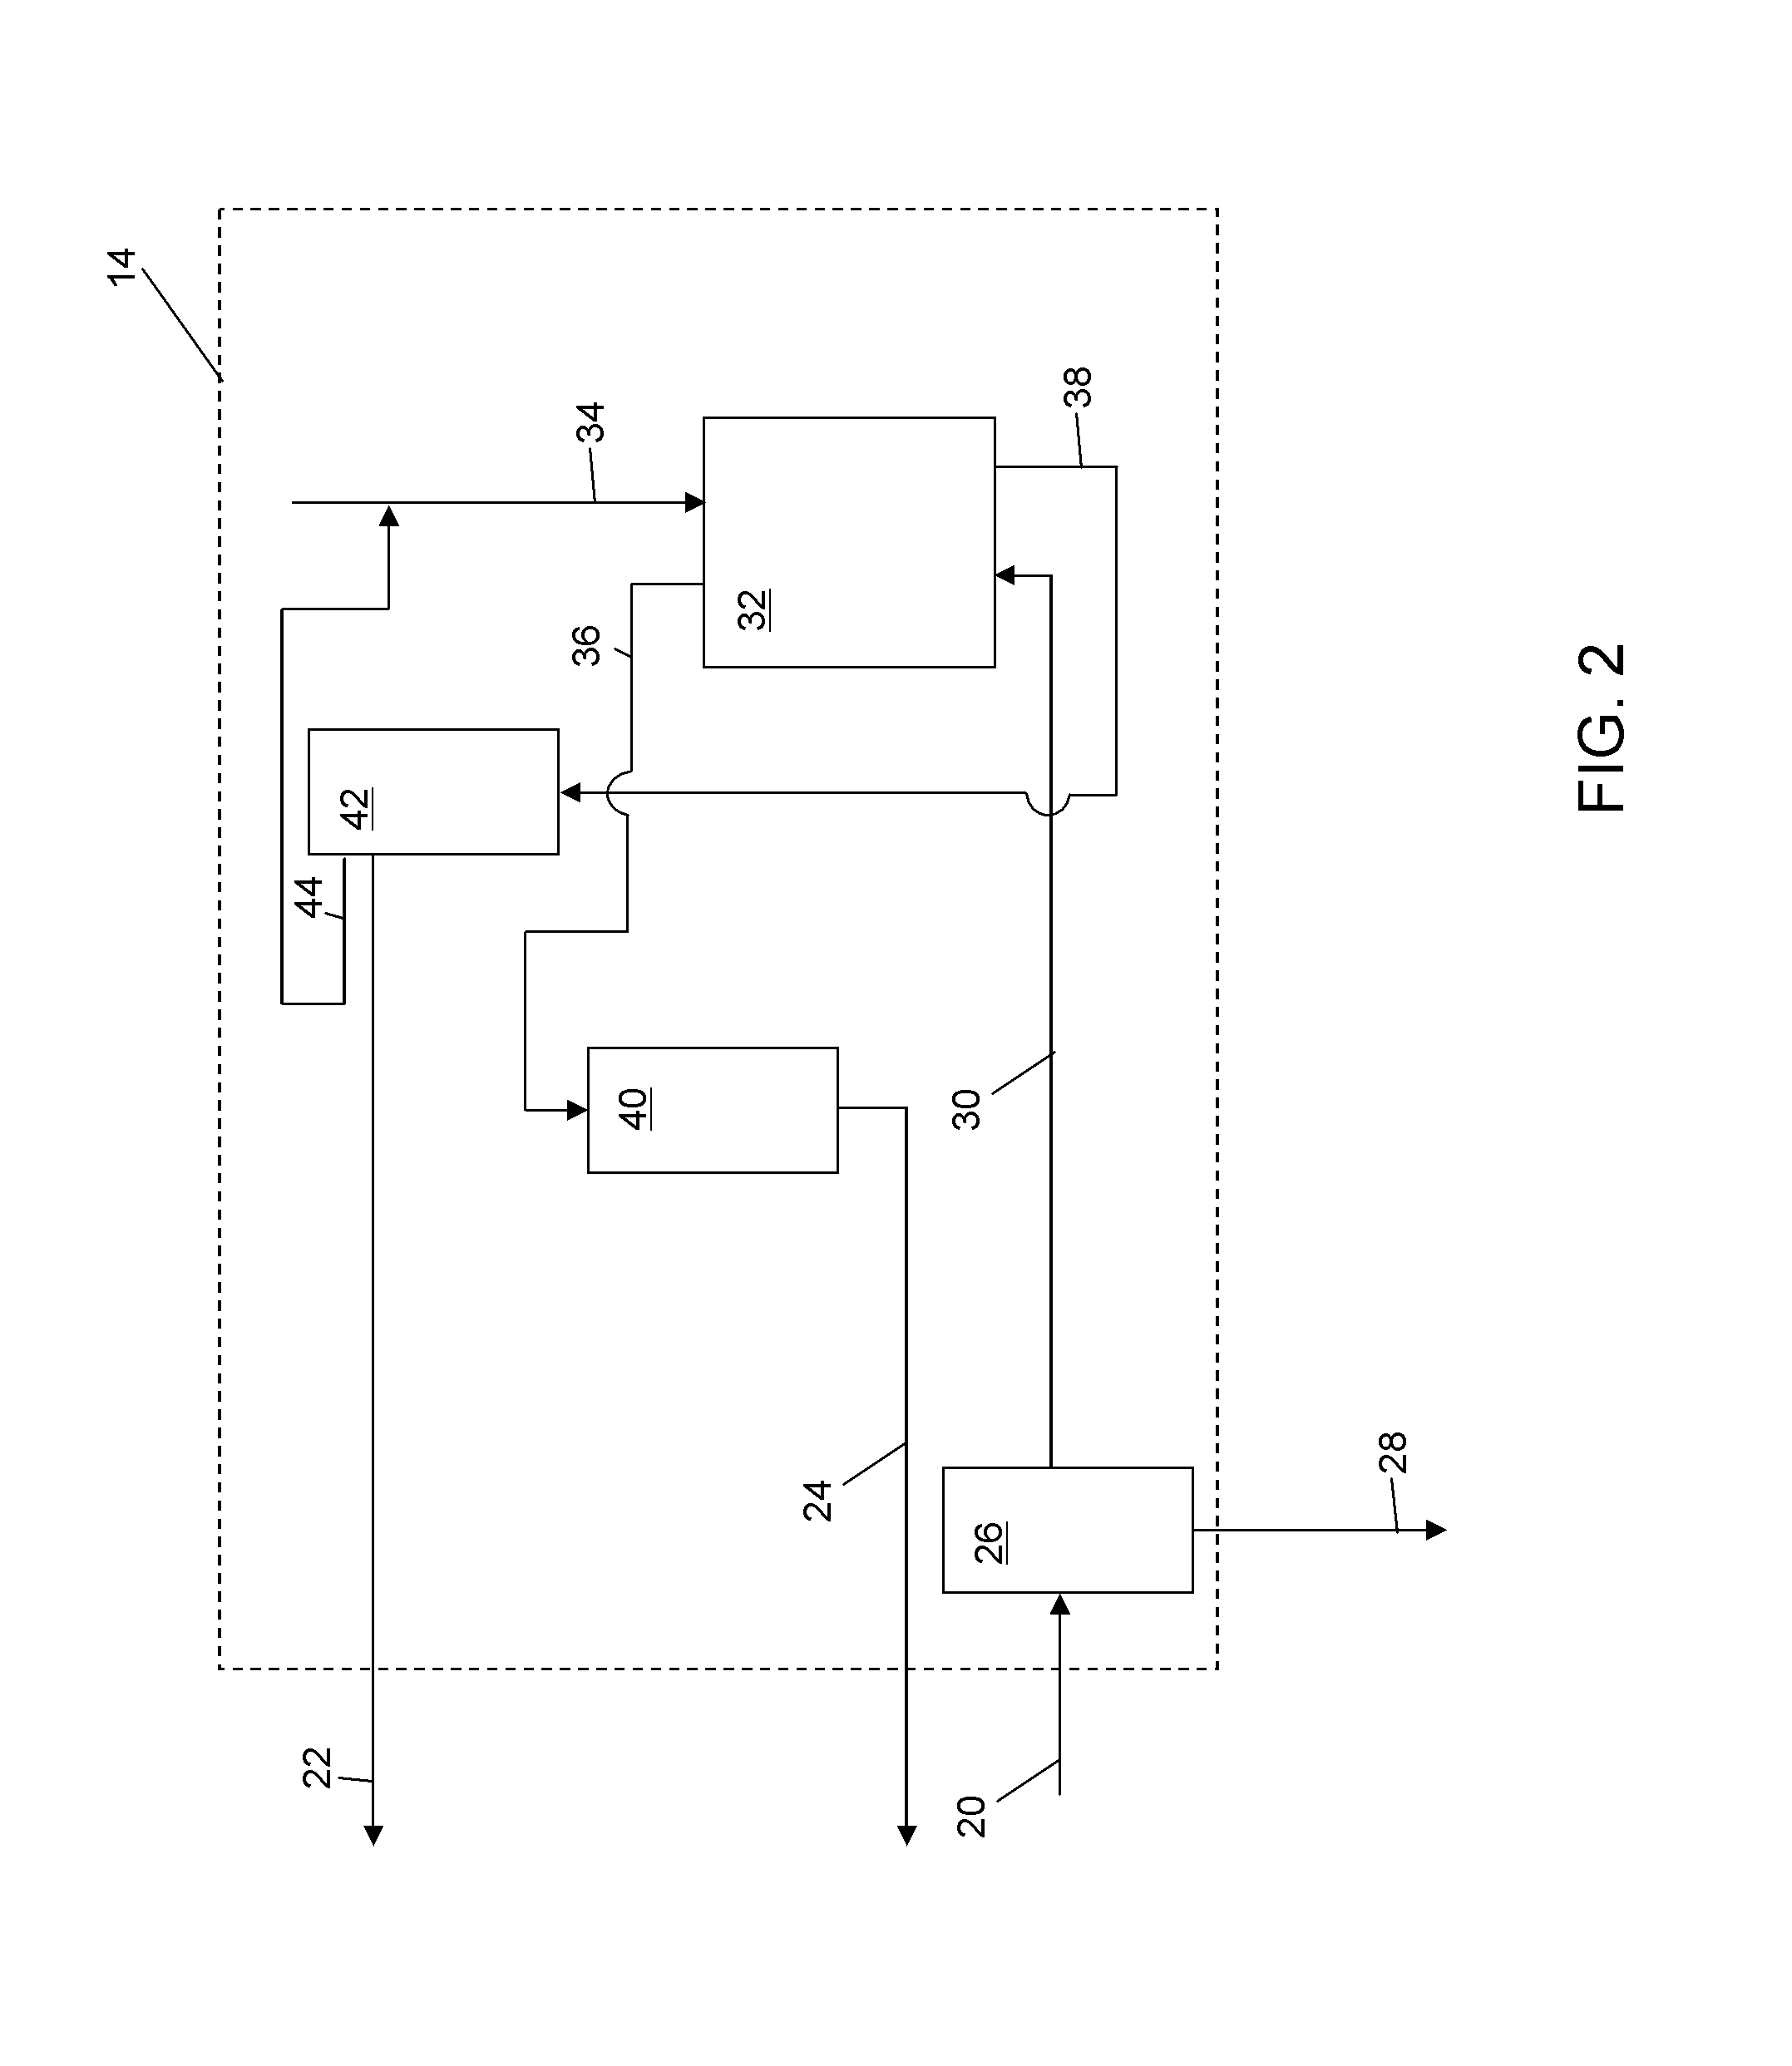 Desulfurization of hydrocarbon feed using gaseous oxidant